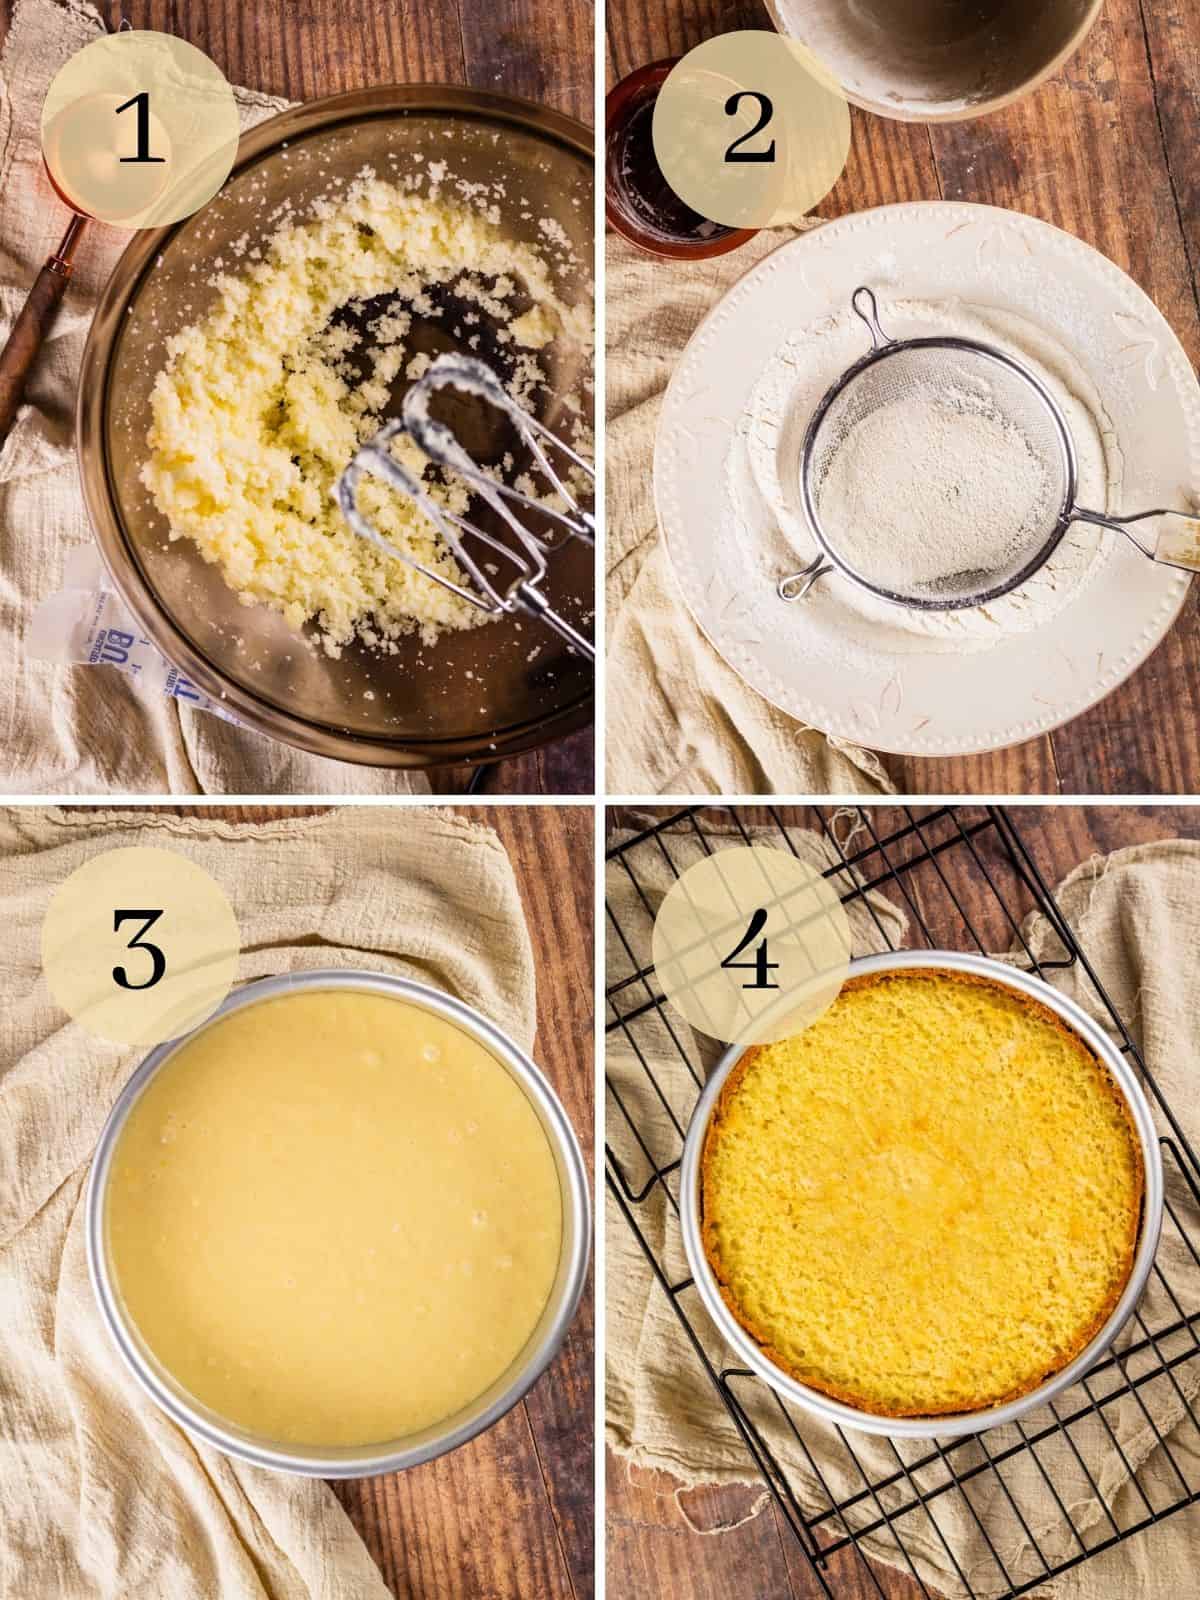 creamed butter and sugar, sifted dry ingredients, cake batter in pan and baked yellow cake